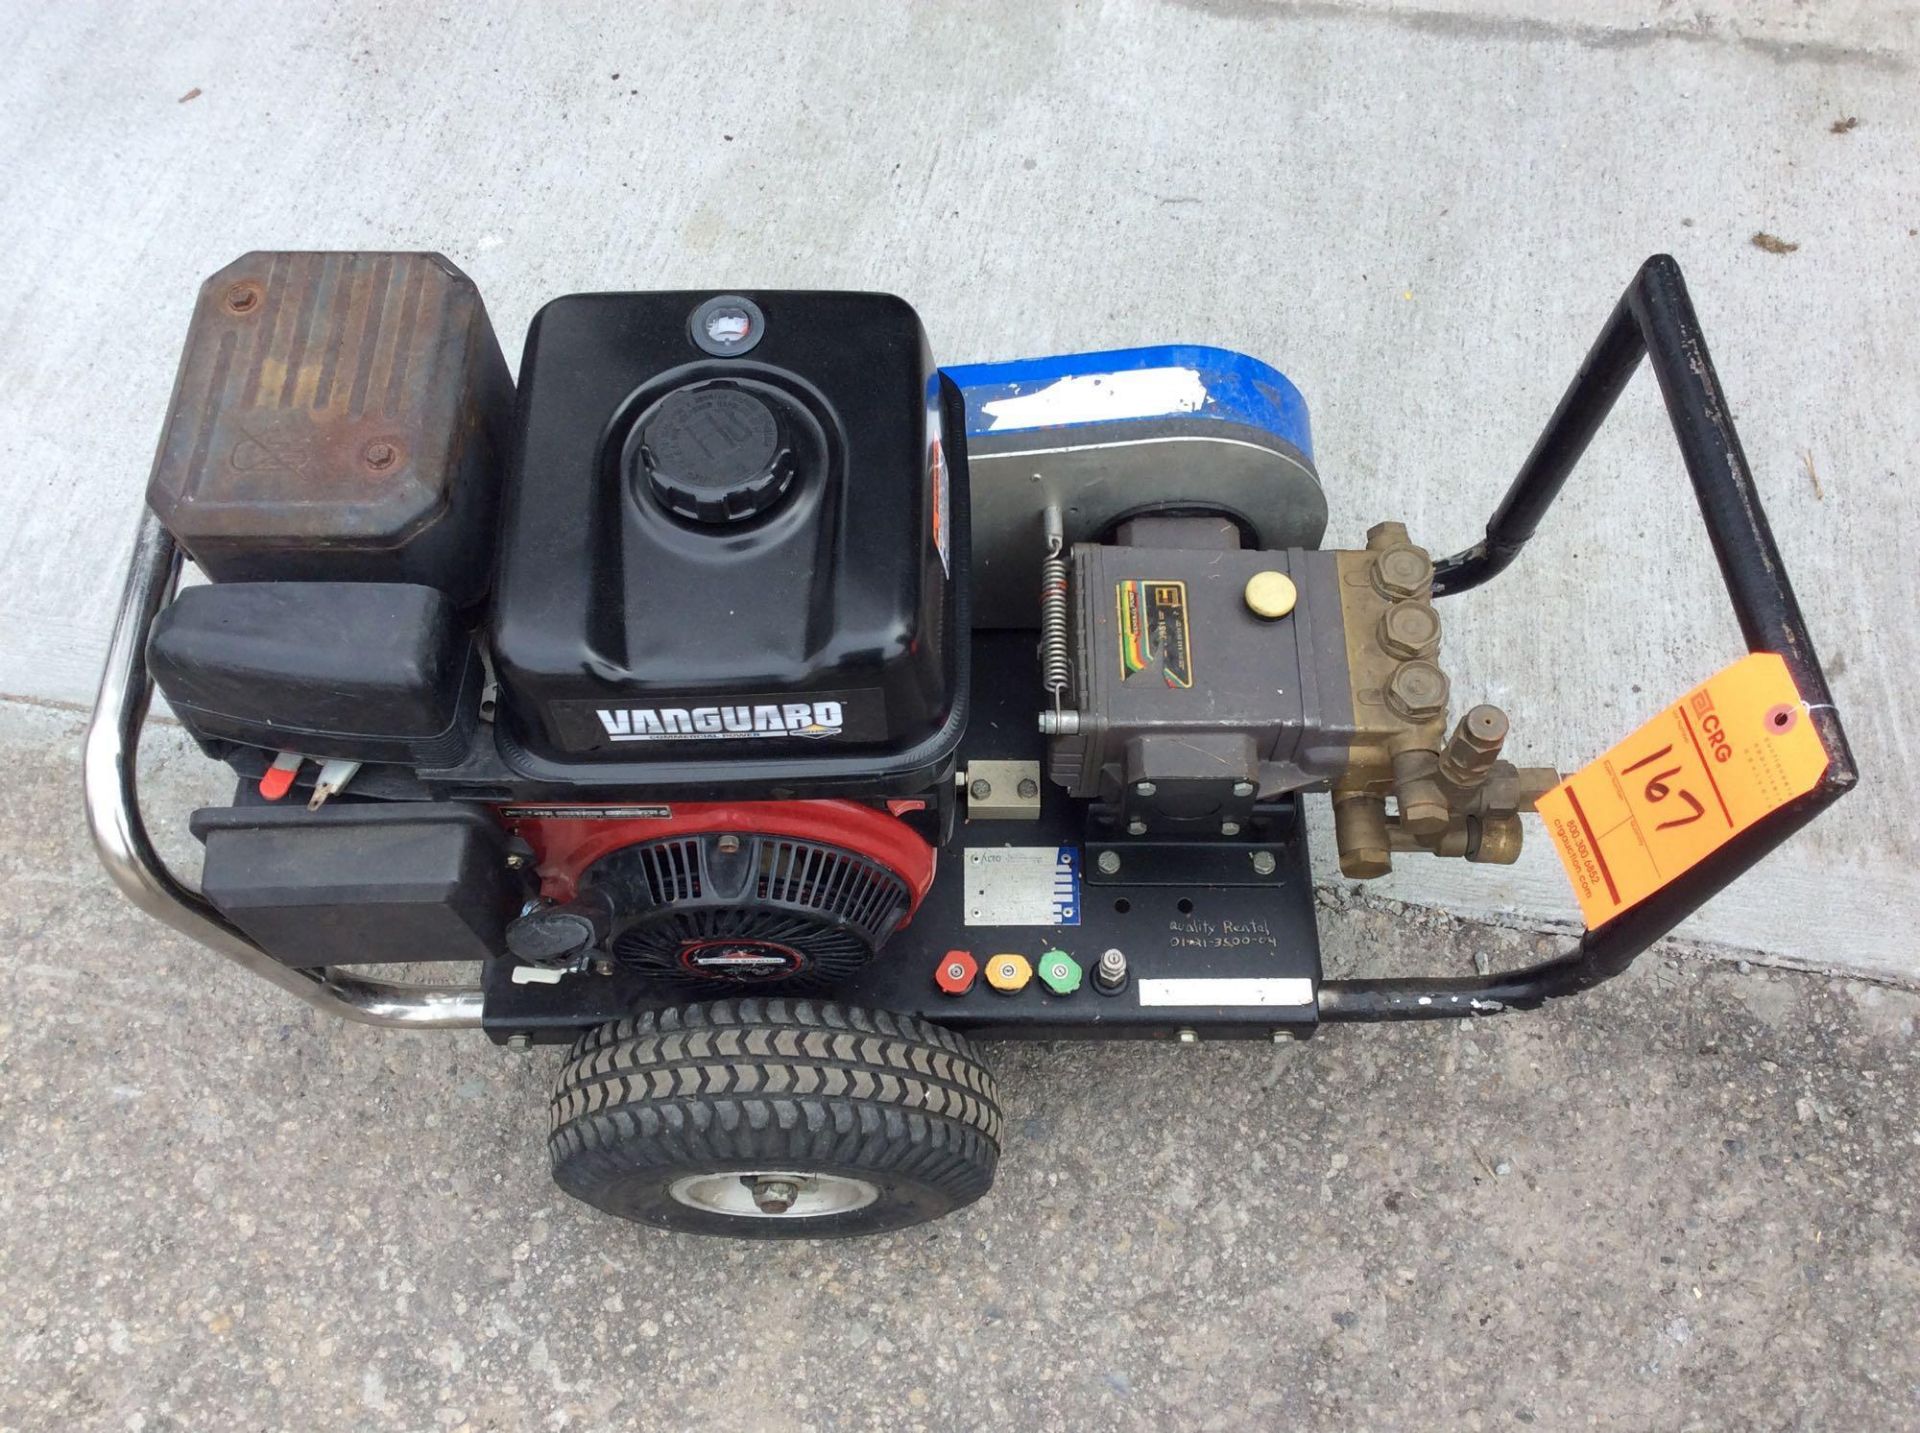 Simpson portable pressure washer with Briggs and Stratton motor